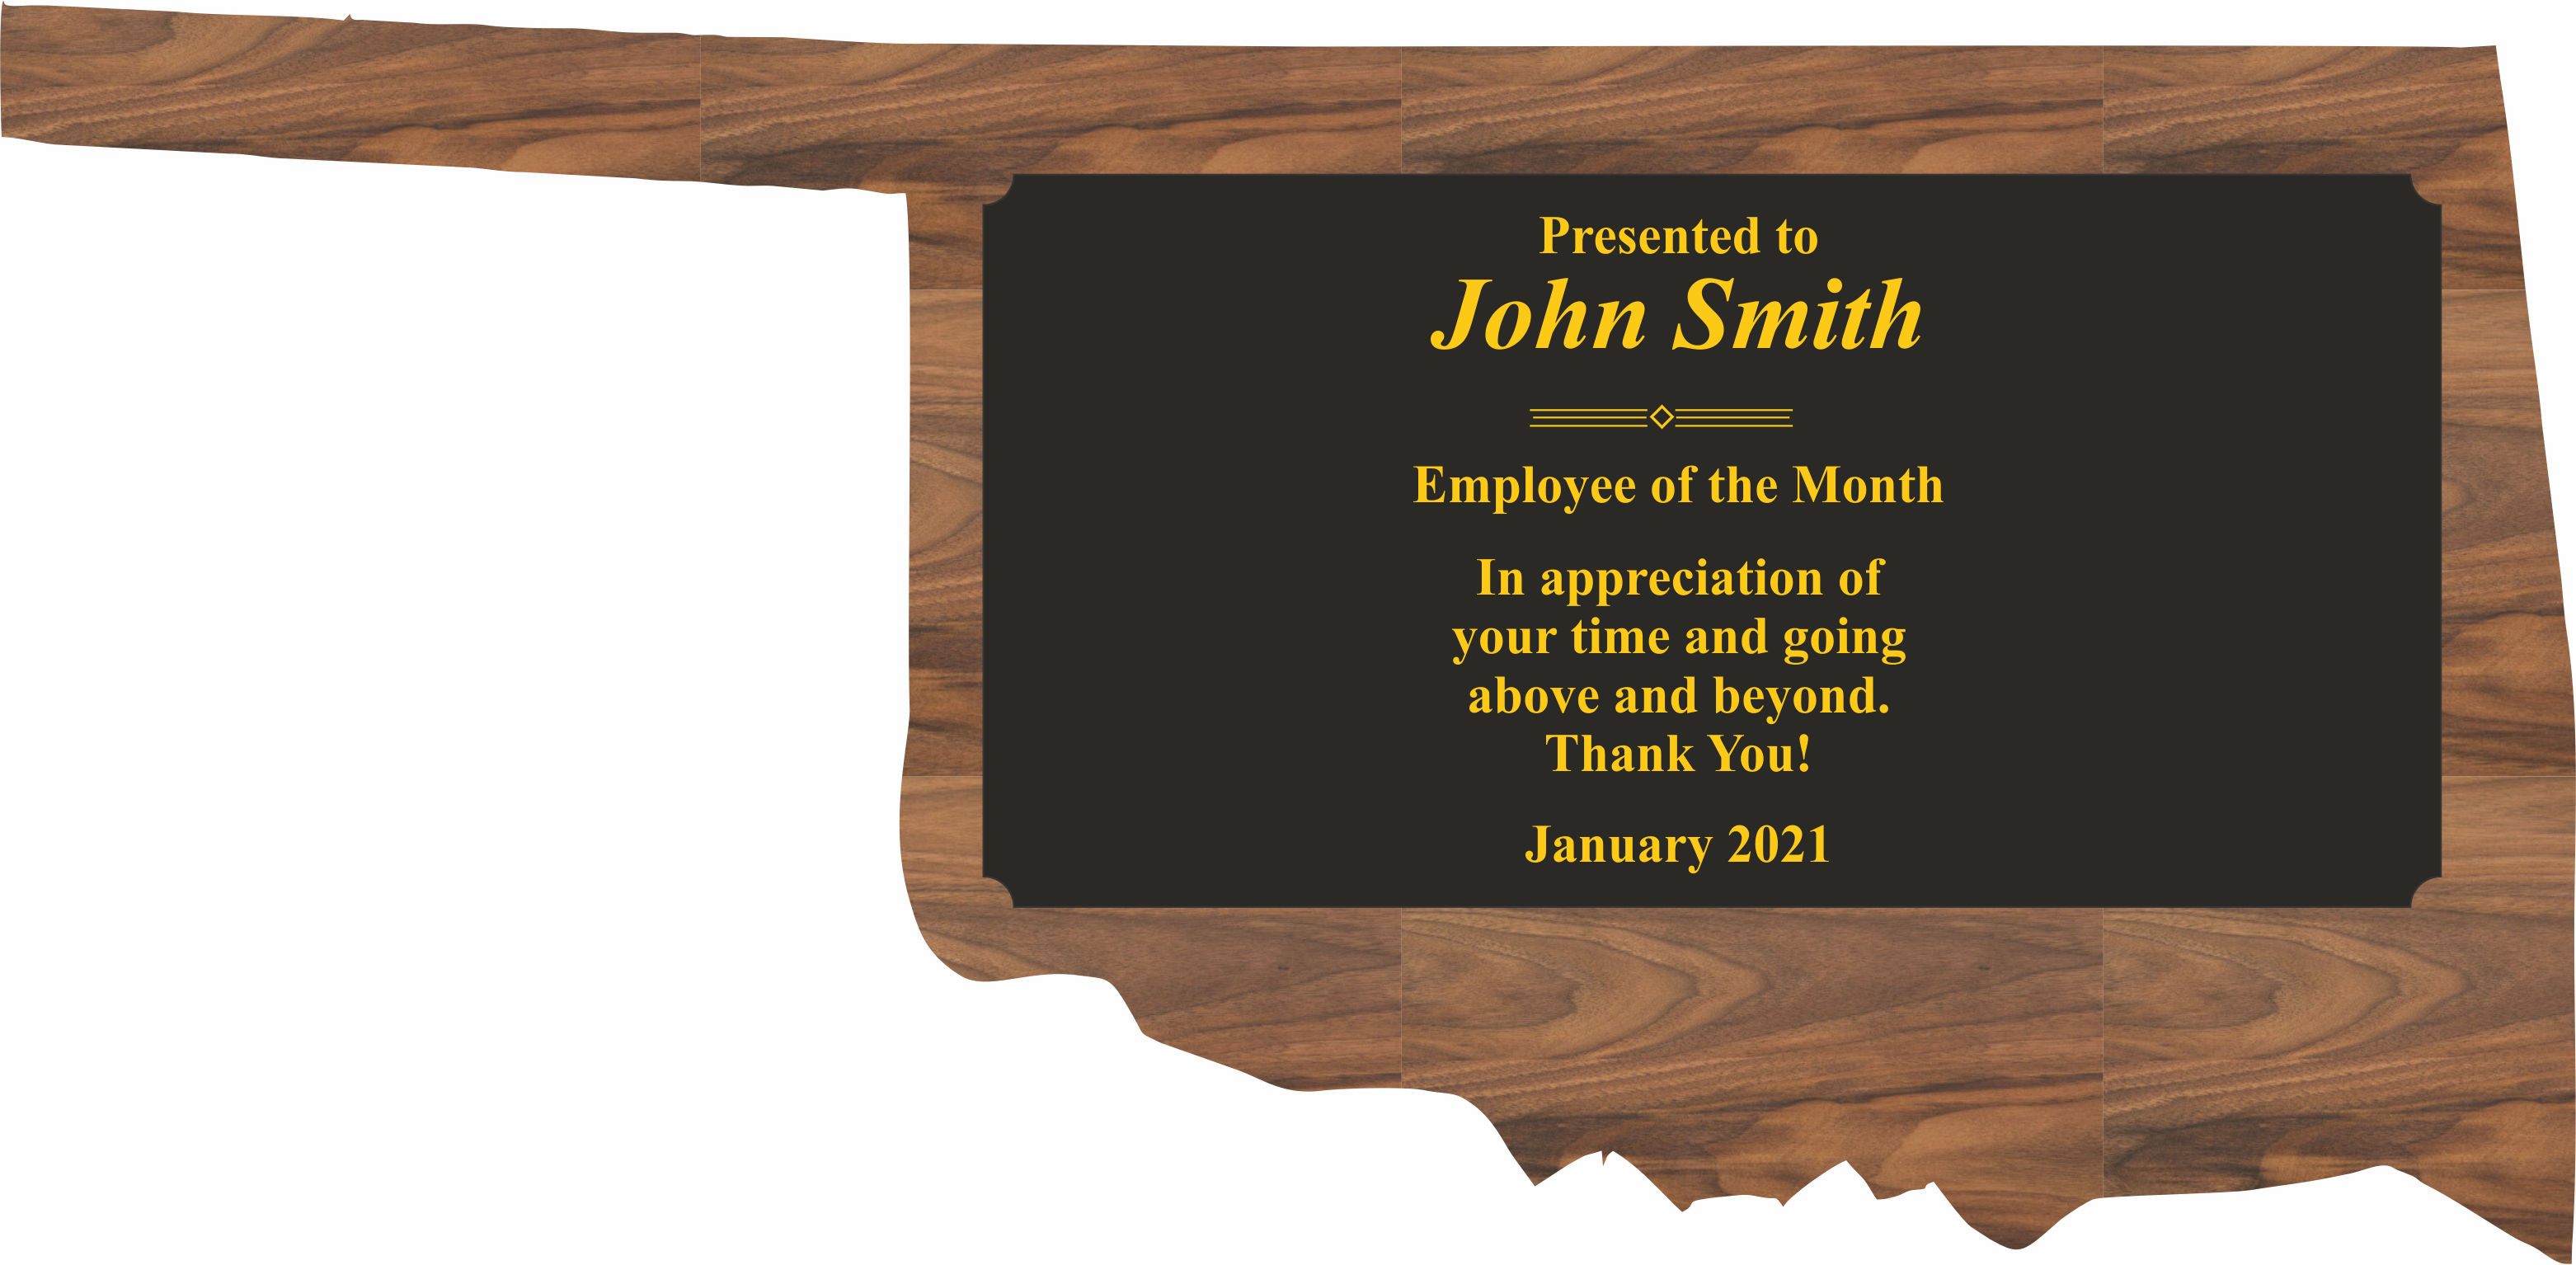 Oklahoma State Shaped Plaques, Custom Engraved With Your Logo!